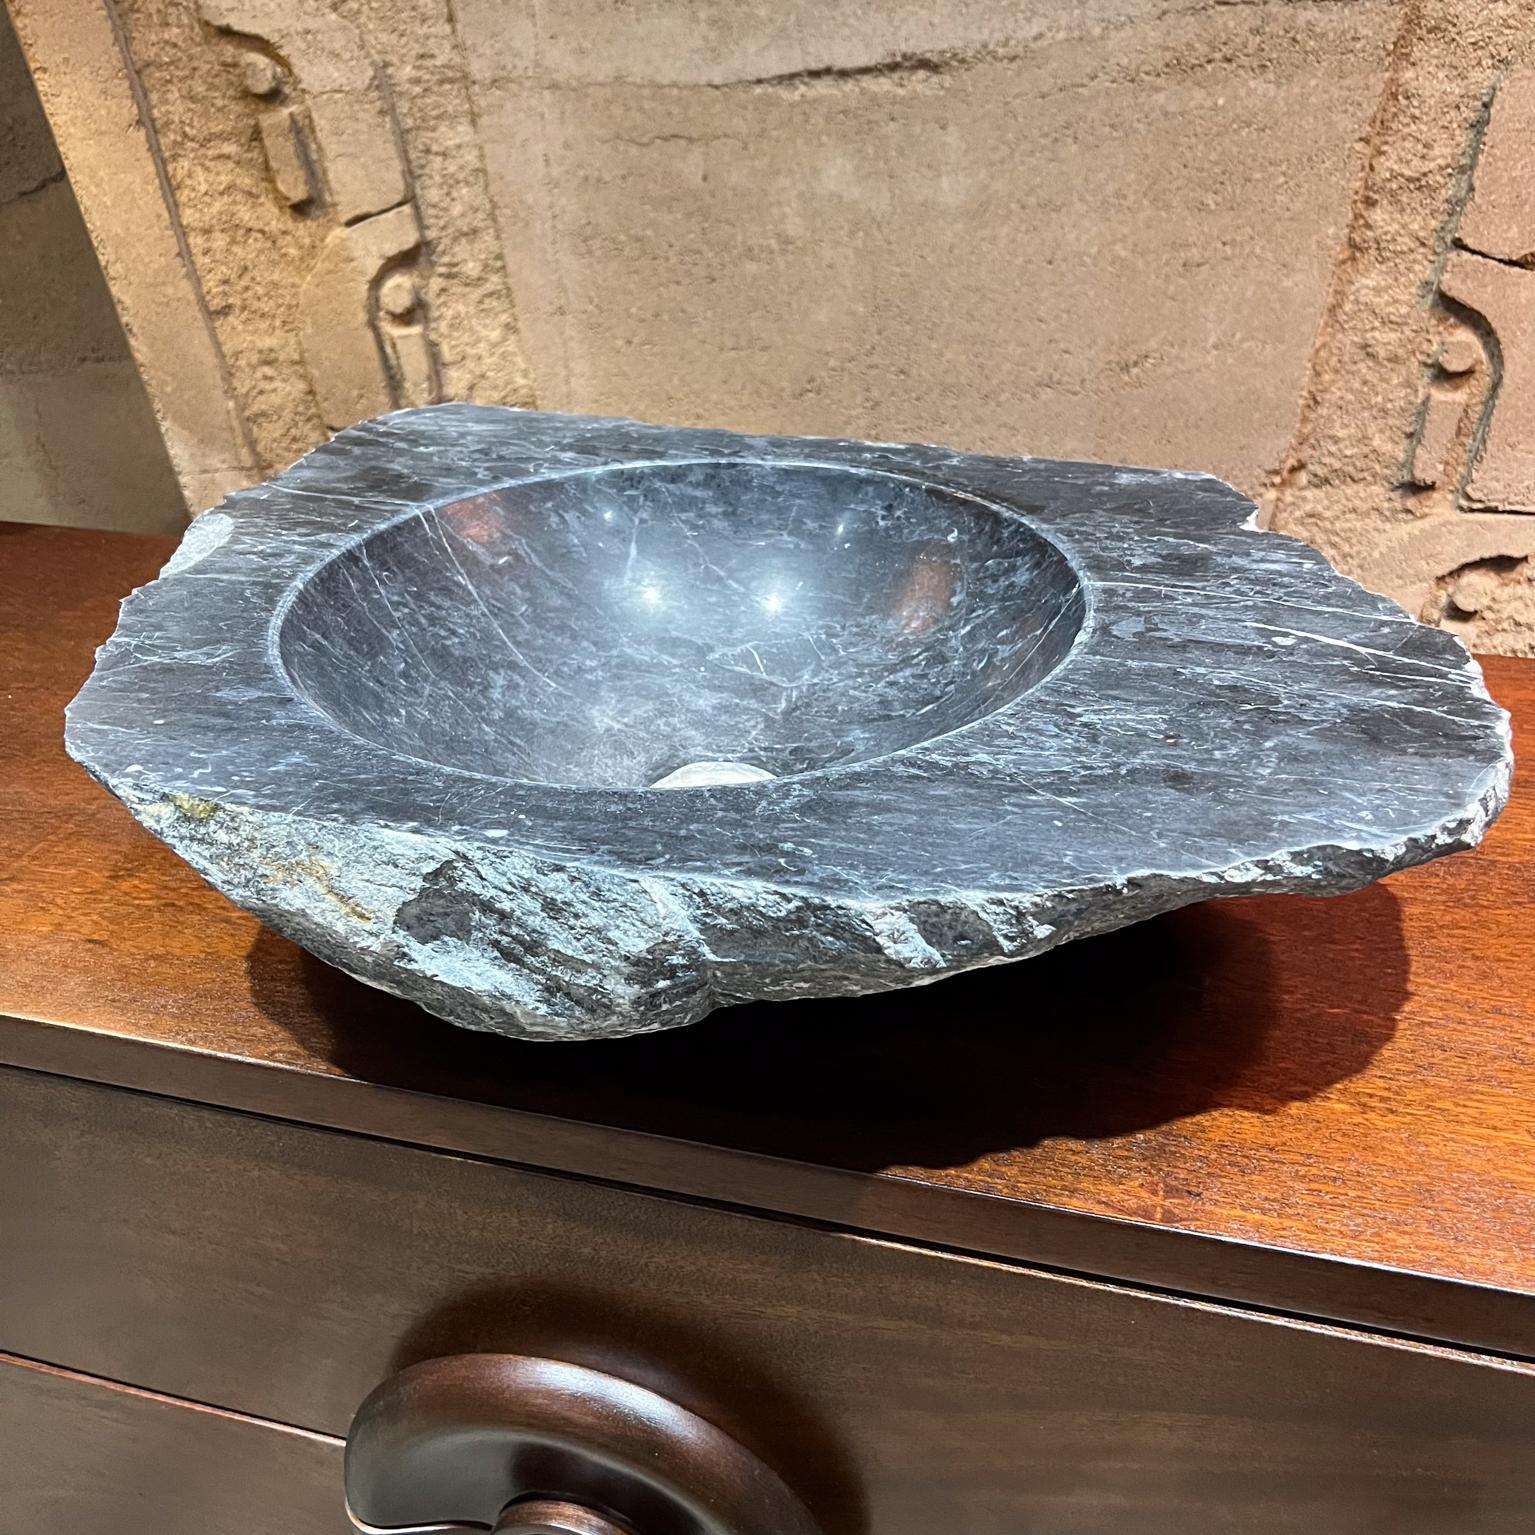 Carved Black Marble Organic Natural Raw Stone Sink Basin
Interior polished Exterior raw edge design.
Stone sink 5.5 h x 17.5 d x 22.25 w
Provides superb artistic merit.
Refer to all images provided.